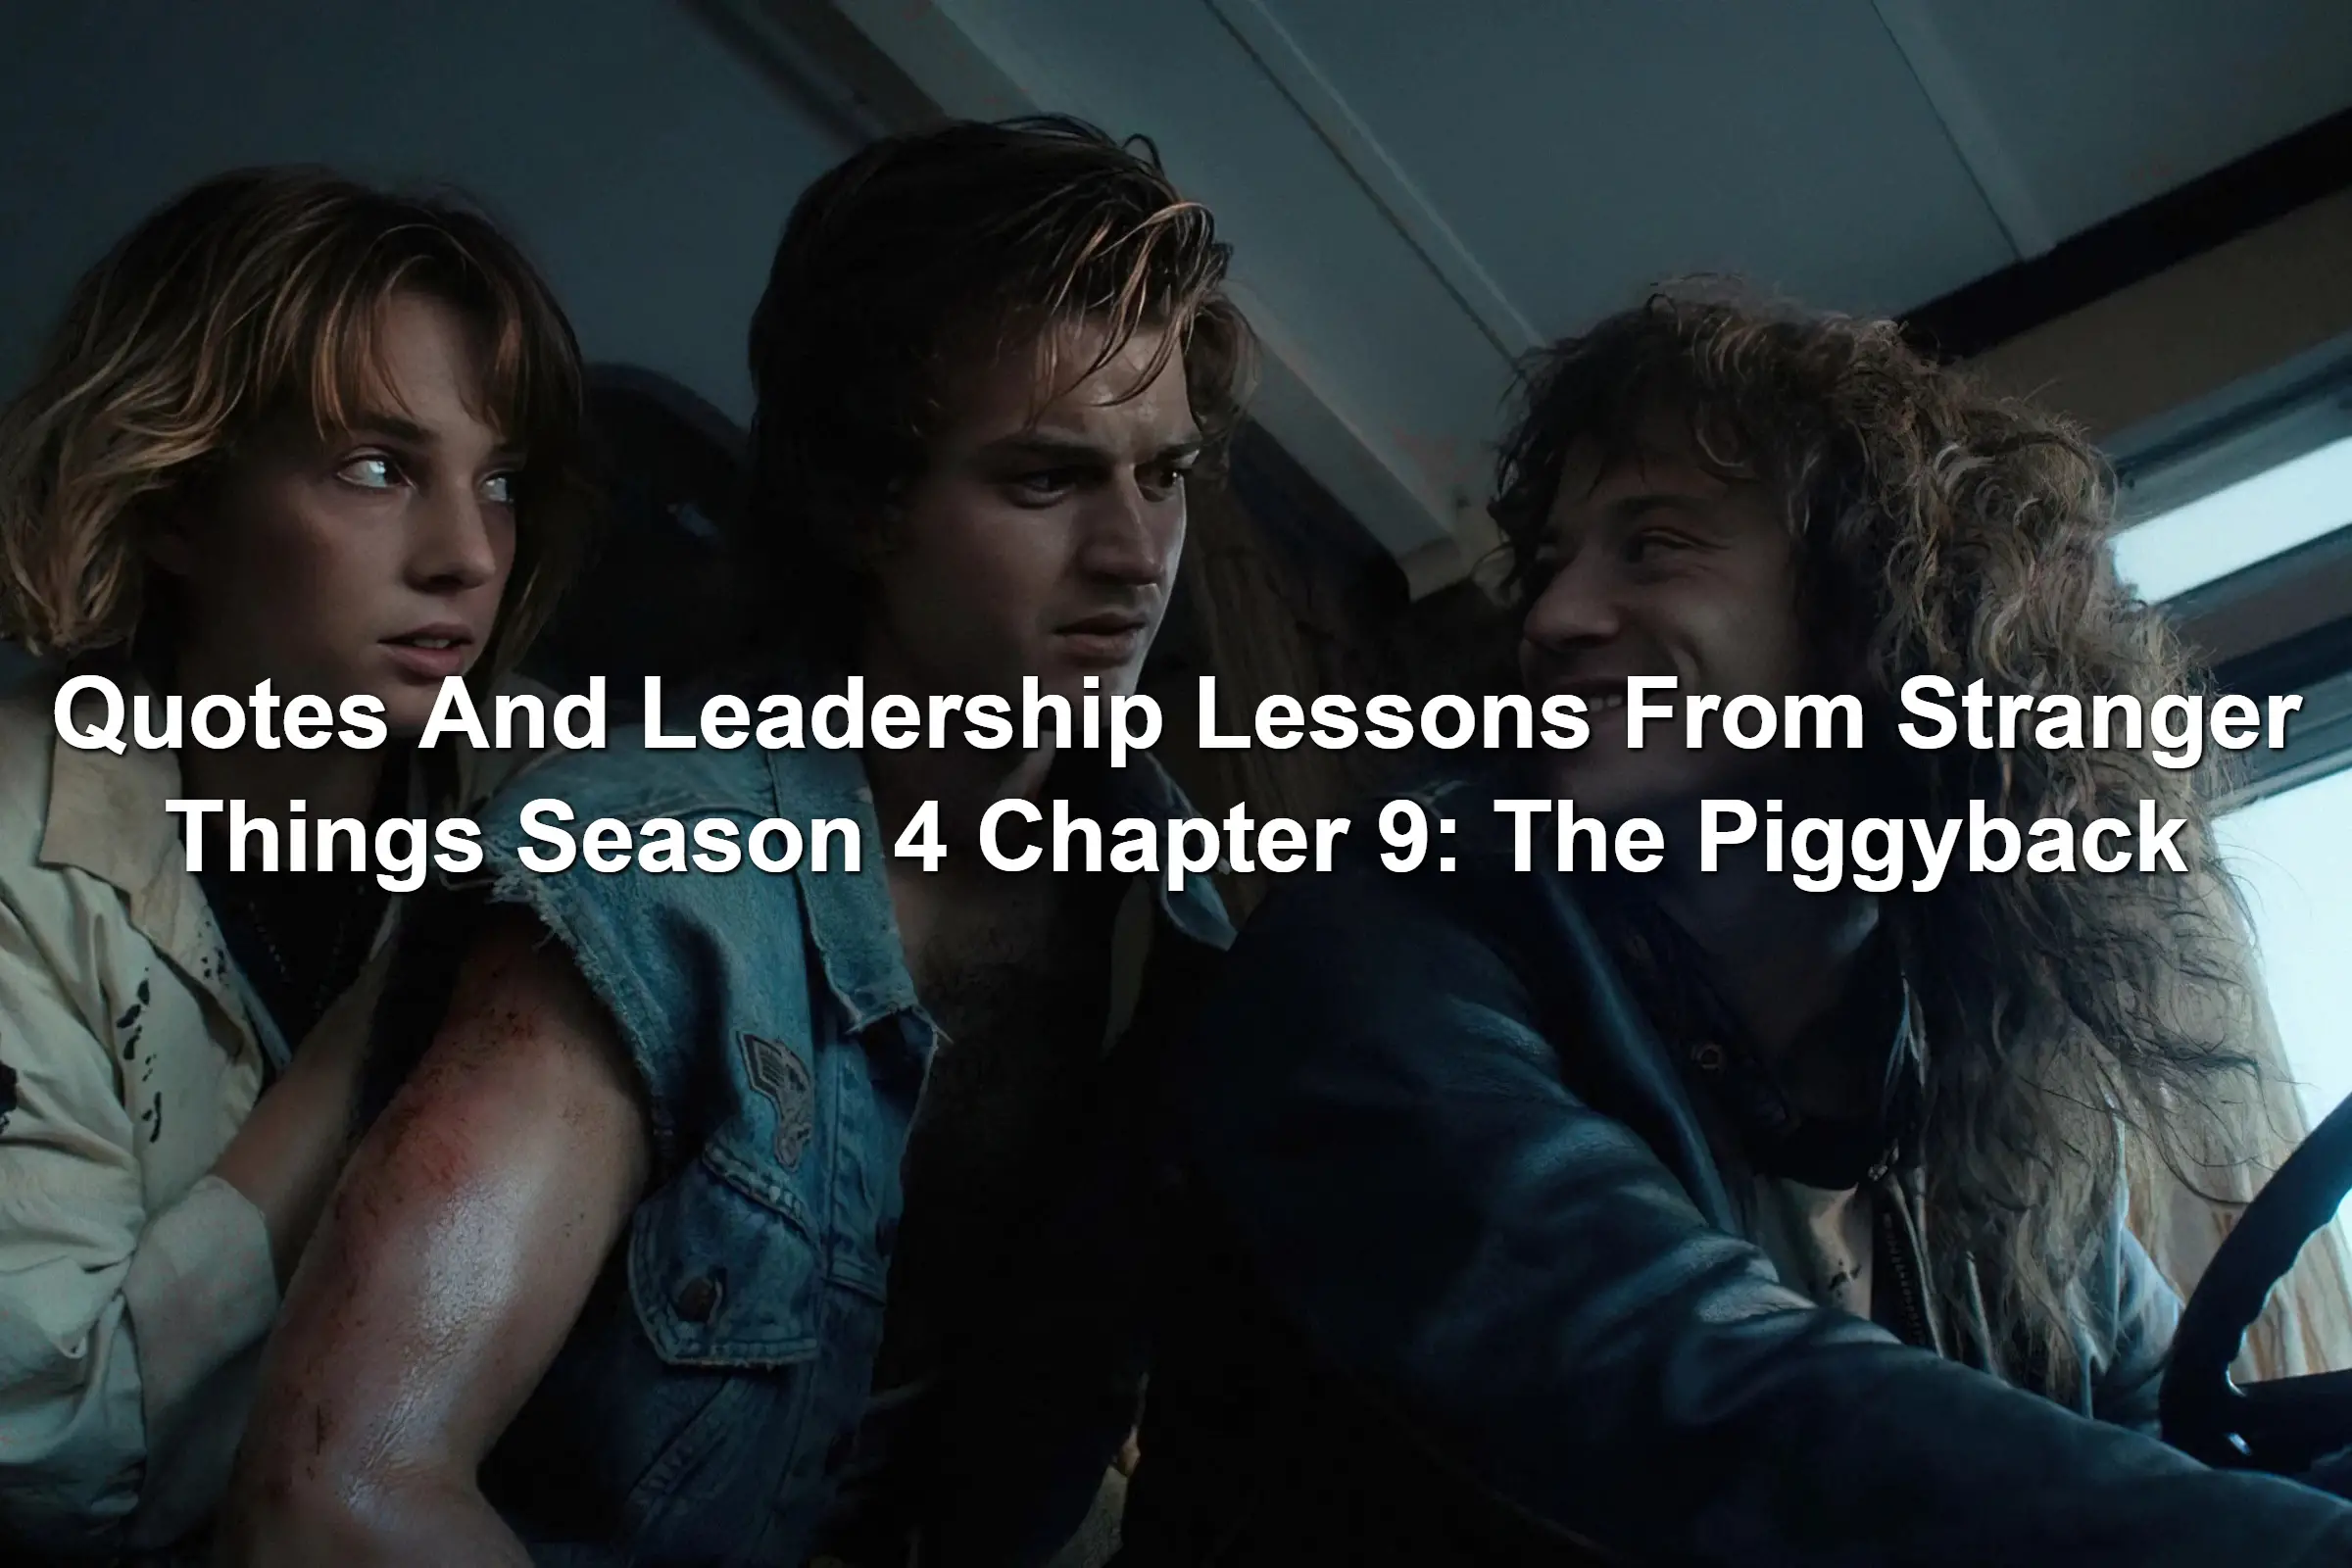 Quotes And Leadership Lessons From Stranger Things Season 4 Chapter 9: The